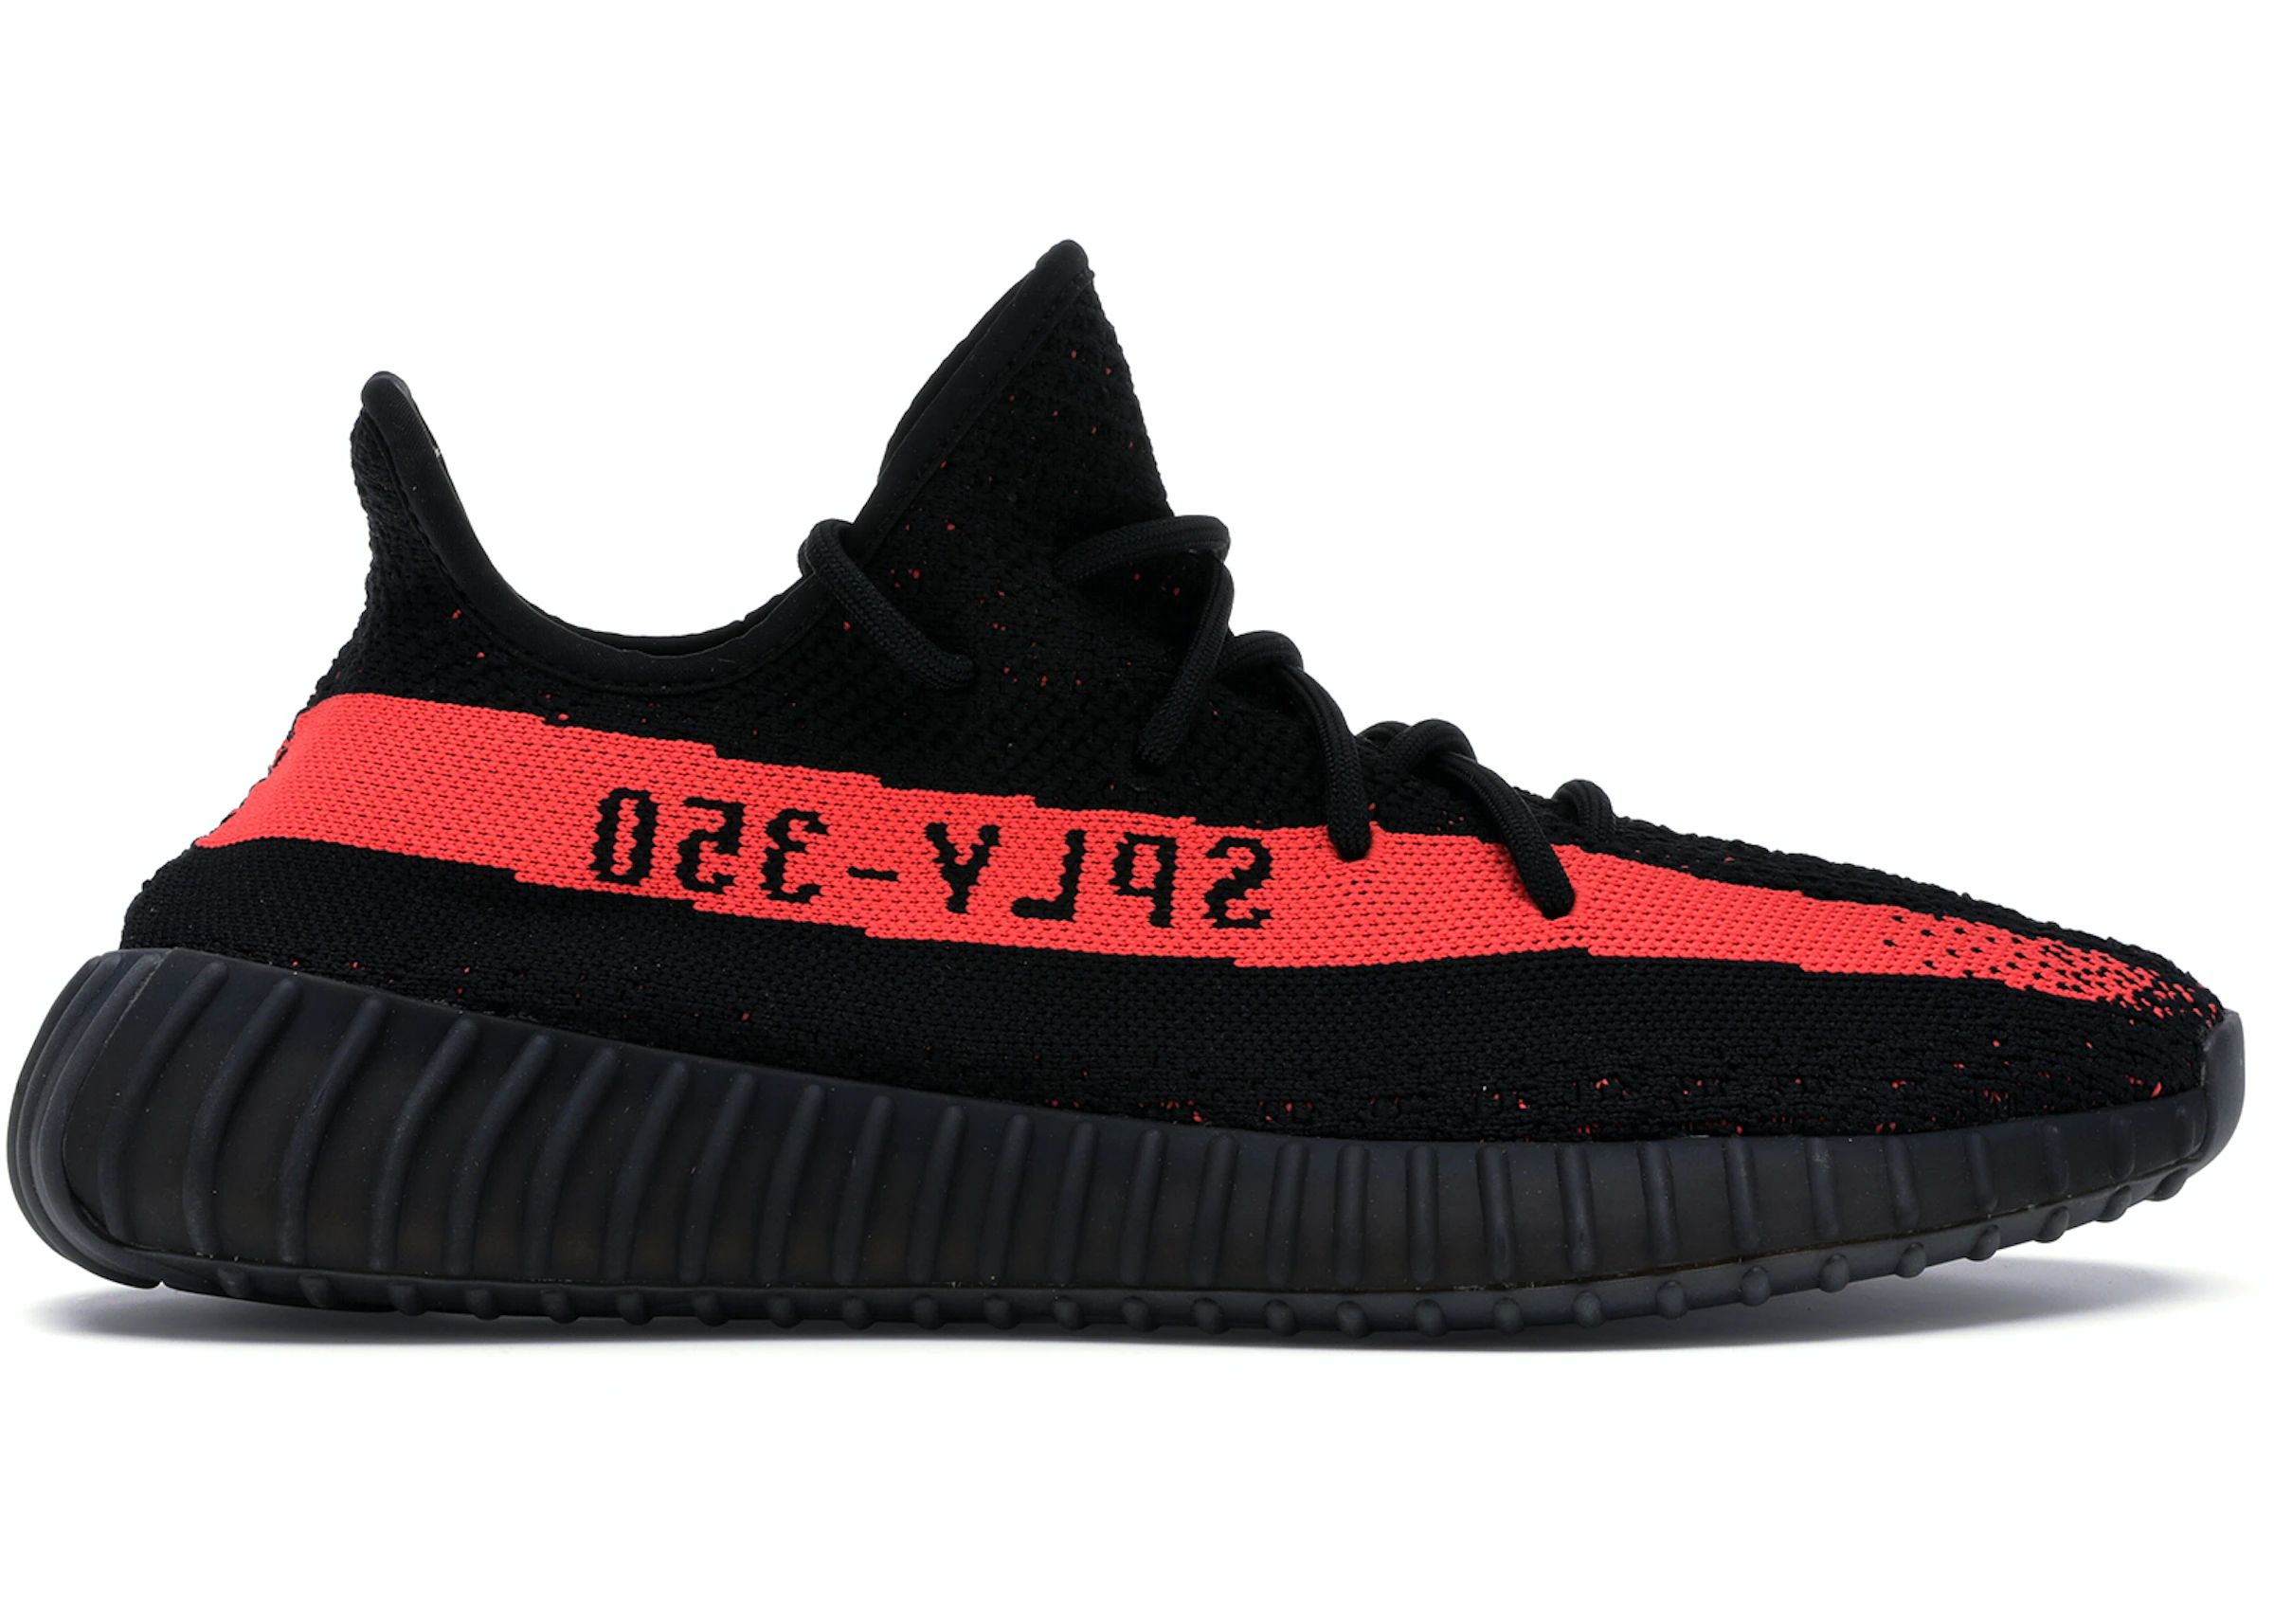 adidas ikea yeezy Yeezy Boost 350 V2 Core Black Red (2016/2022) - BY9612 - US